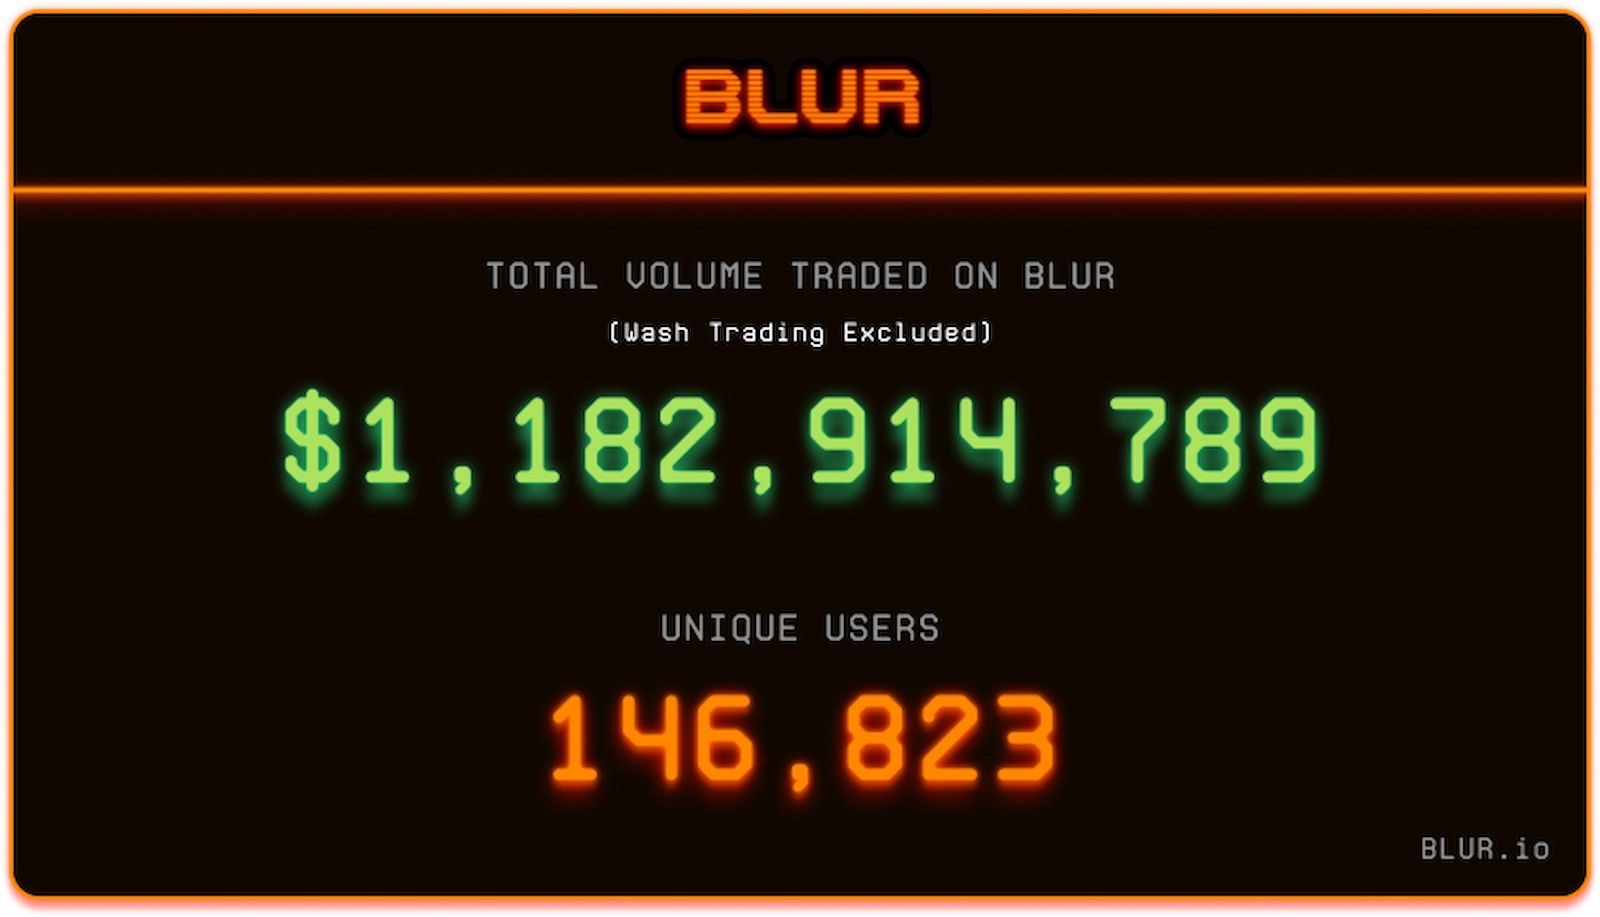 Blur accepted, albeit indirectly, that wash trading was prevalent on its network.